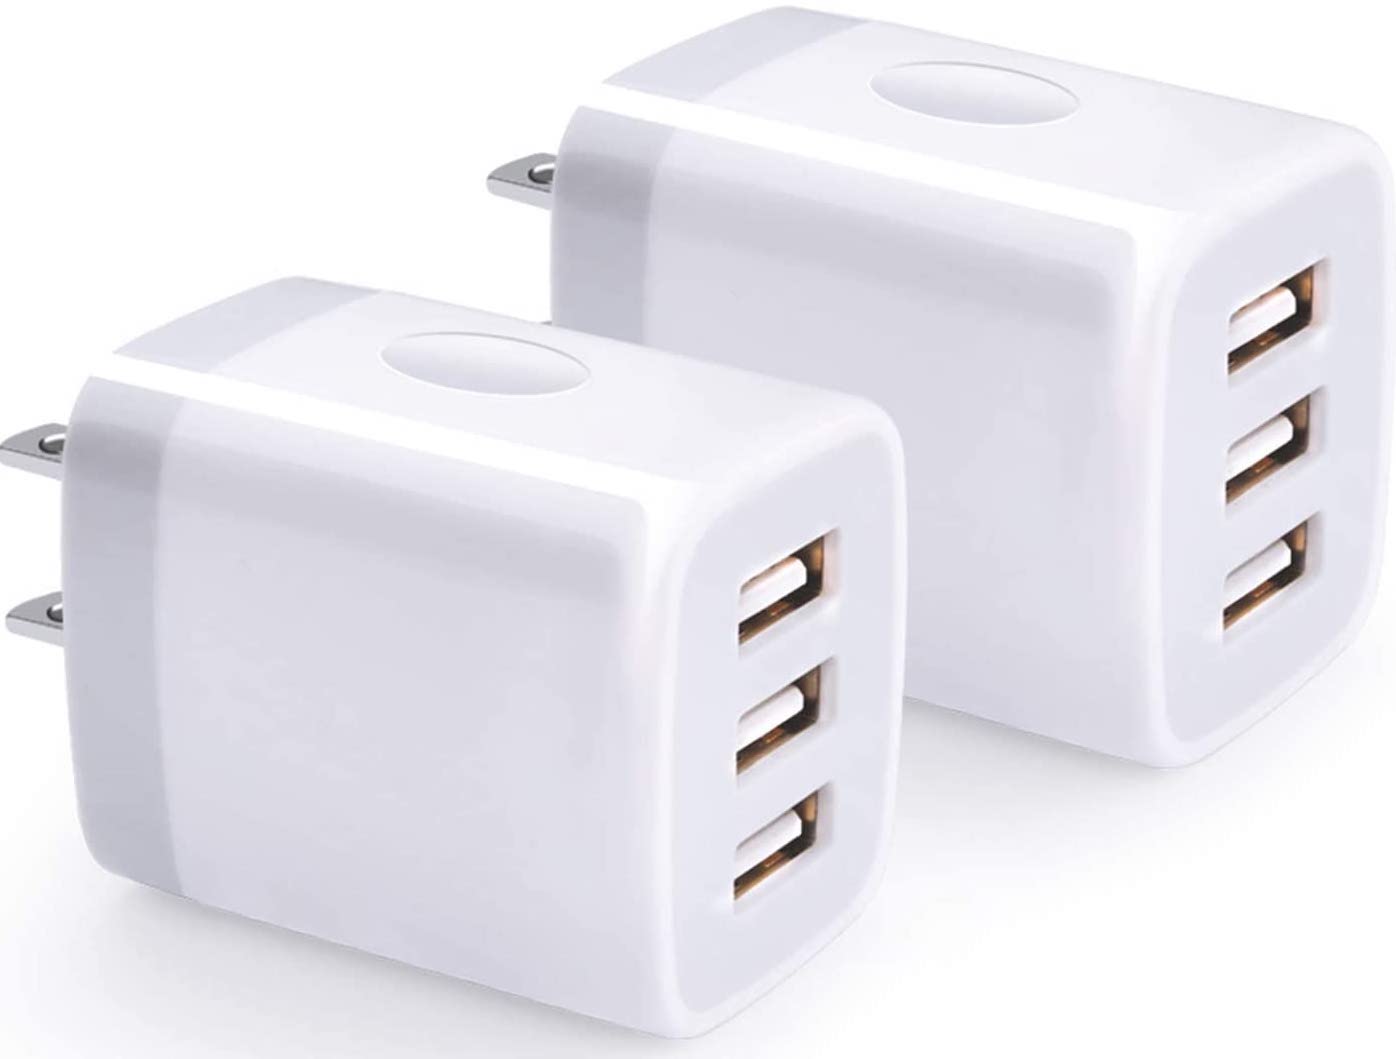 Hootek Usb Wall Charger Render Cropped